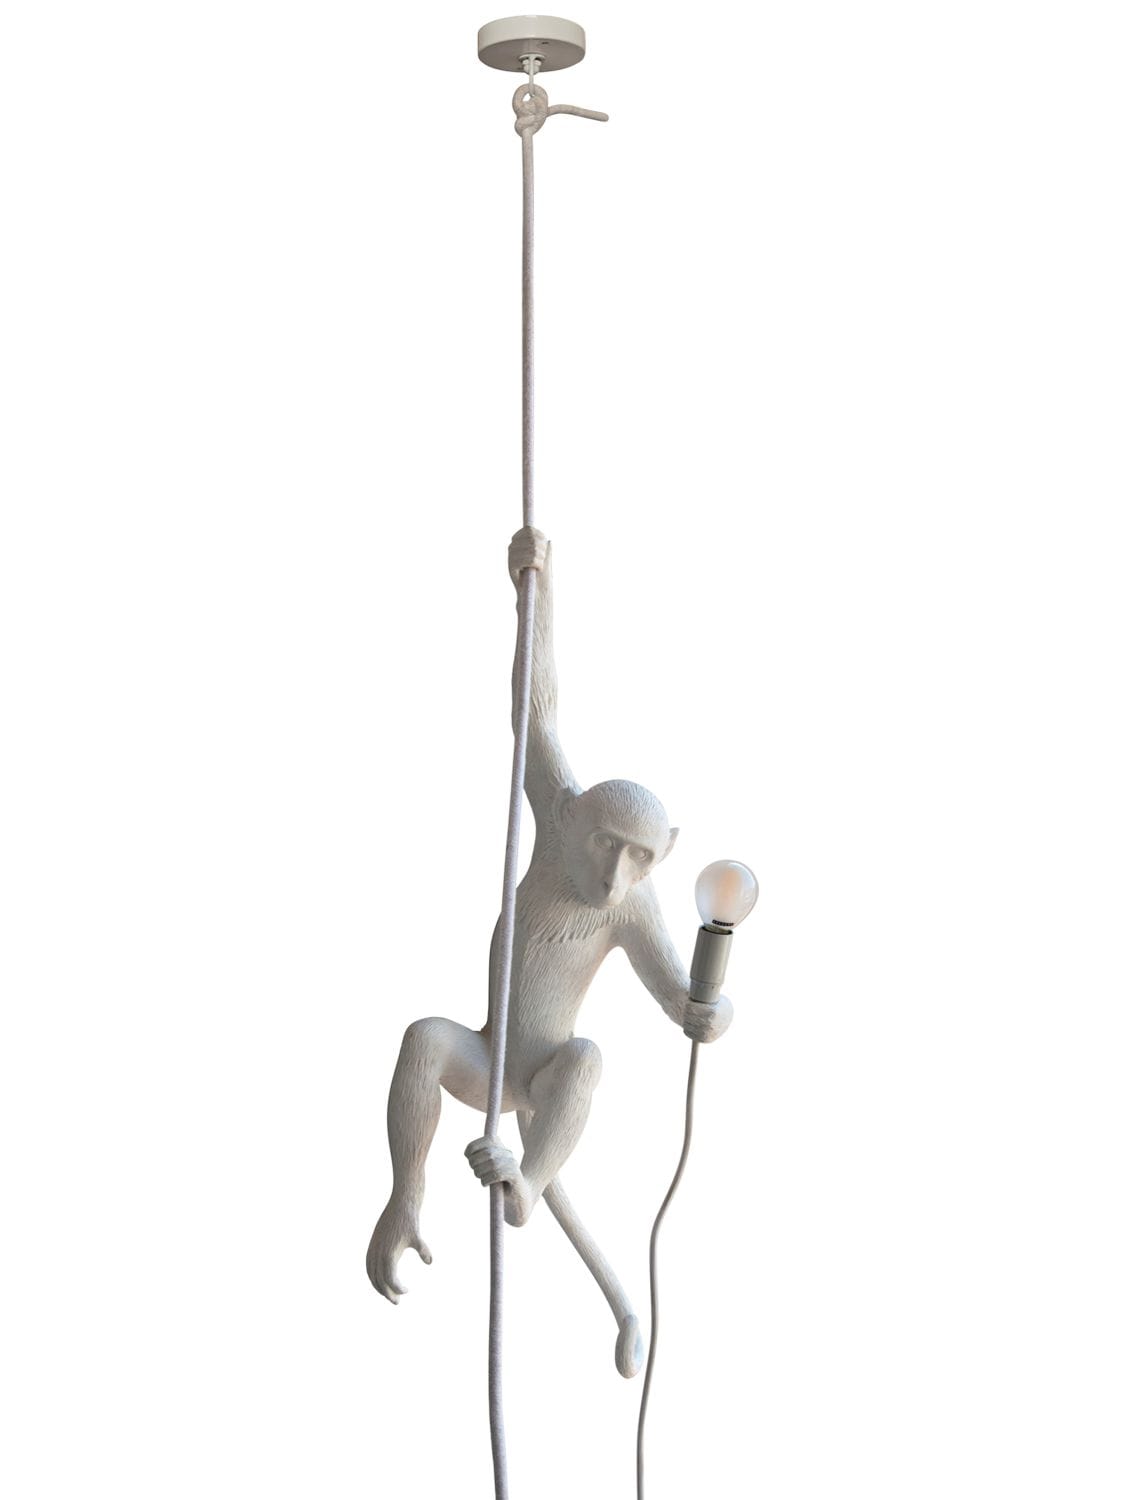 Seletti Monkey On A Cord Ceiling Lamp In White